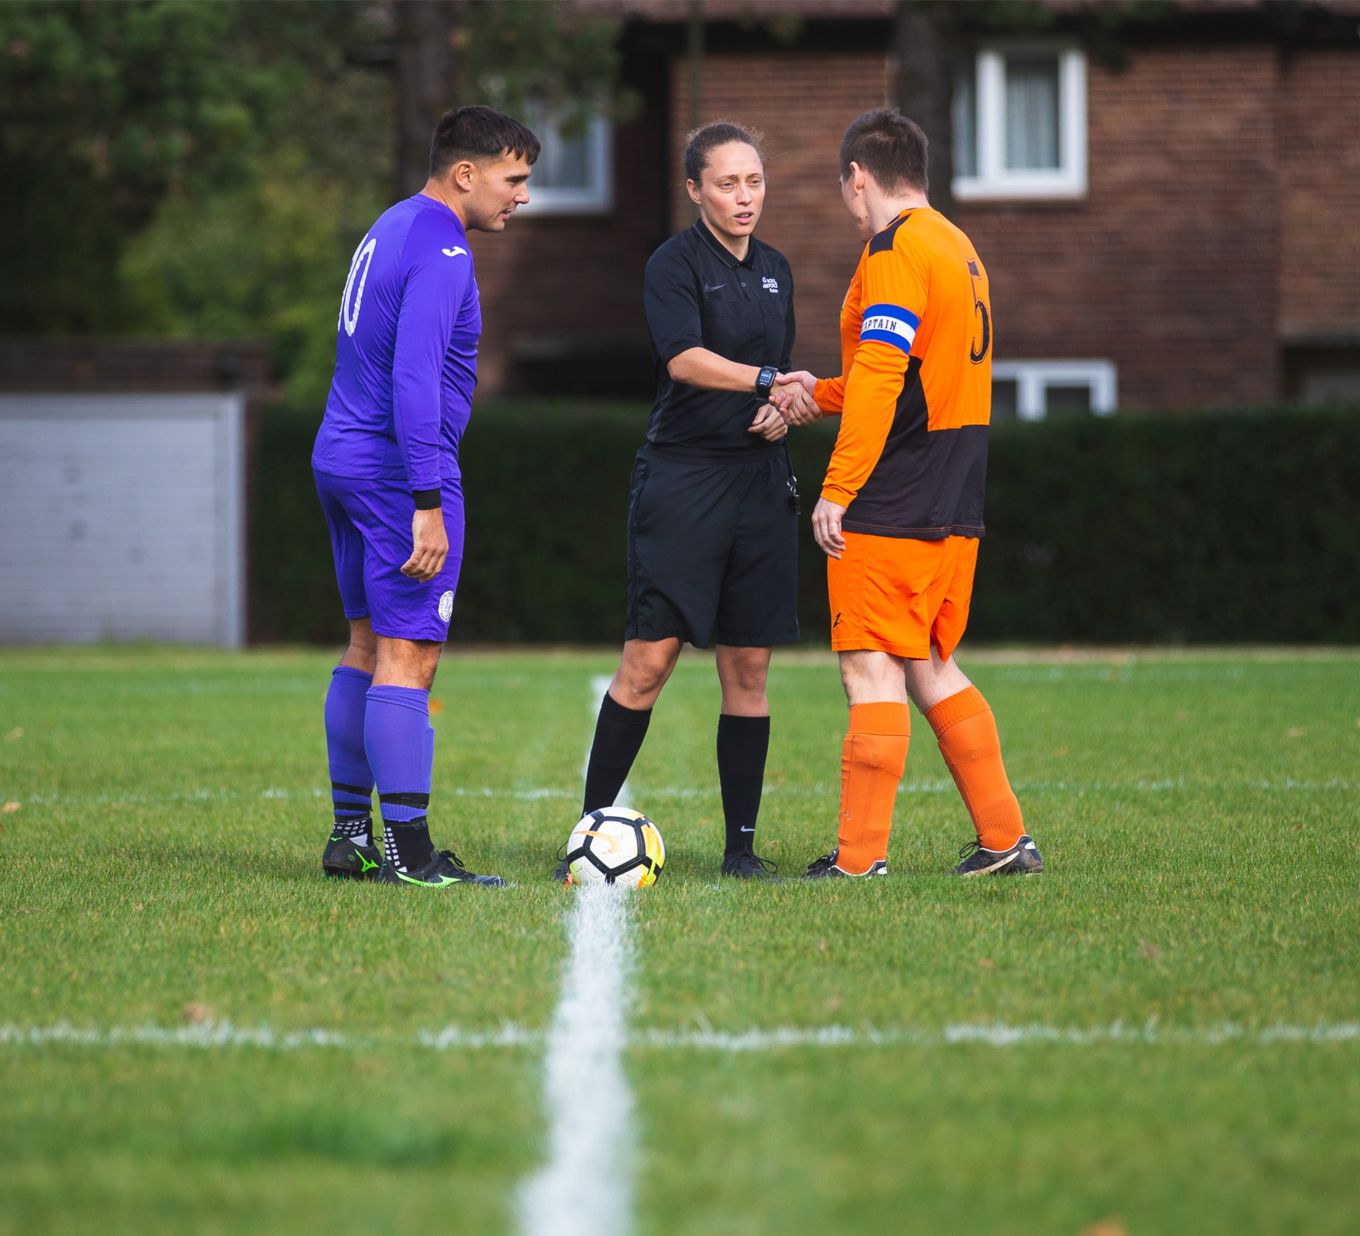 Corporal Lauren Impey refereeing a football match at RAF Wittering